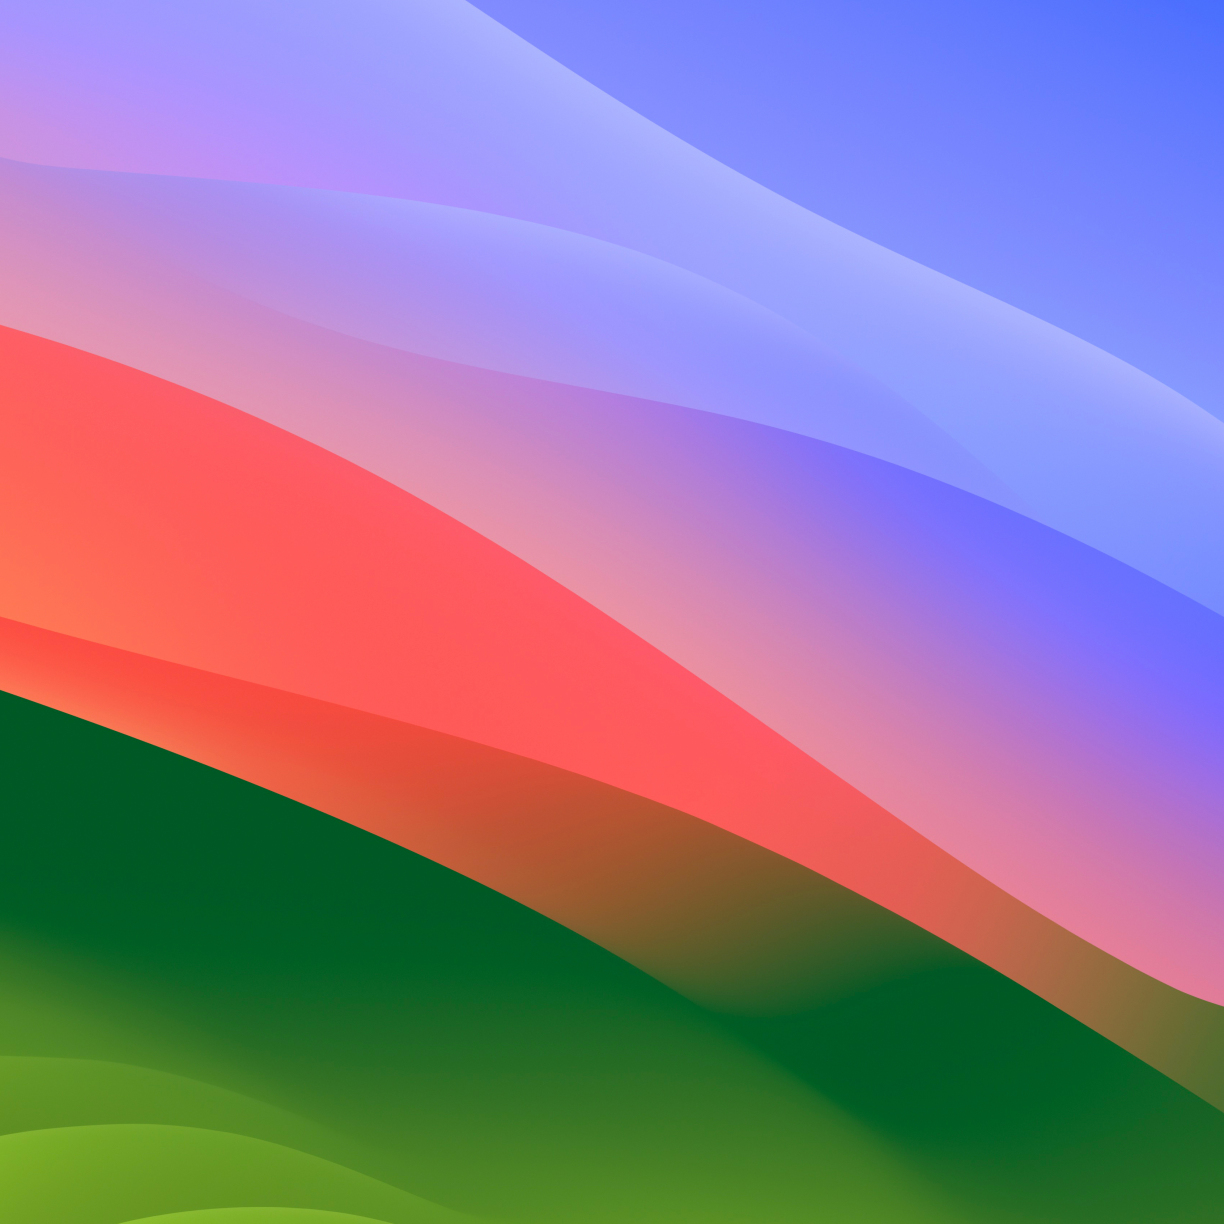 MacOS Sonoma, colorful waves, stock photo, 1224x1224 wallpaper